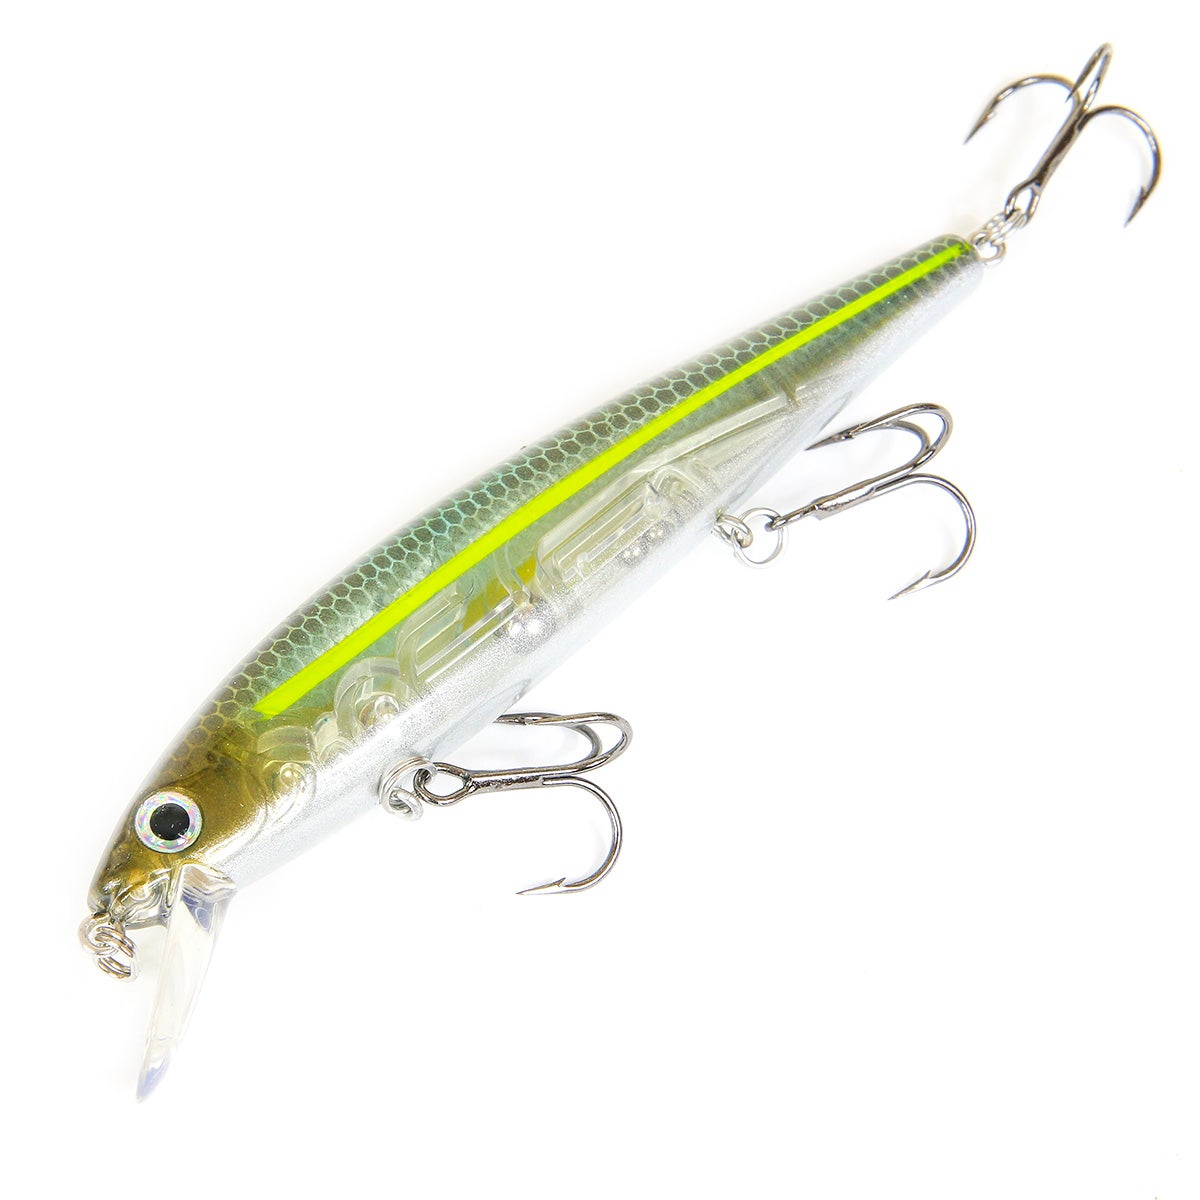 The Pros' Favorite Winter Time Bass Lures